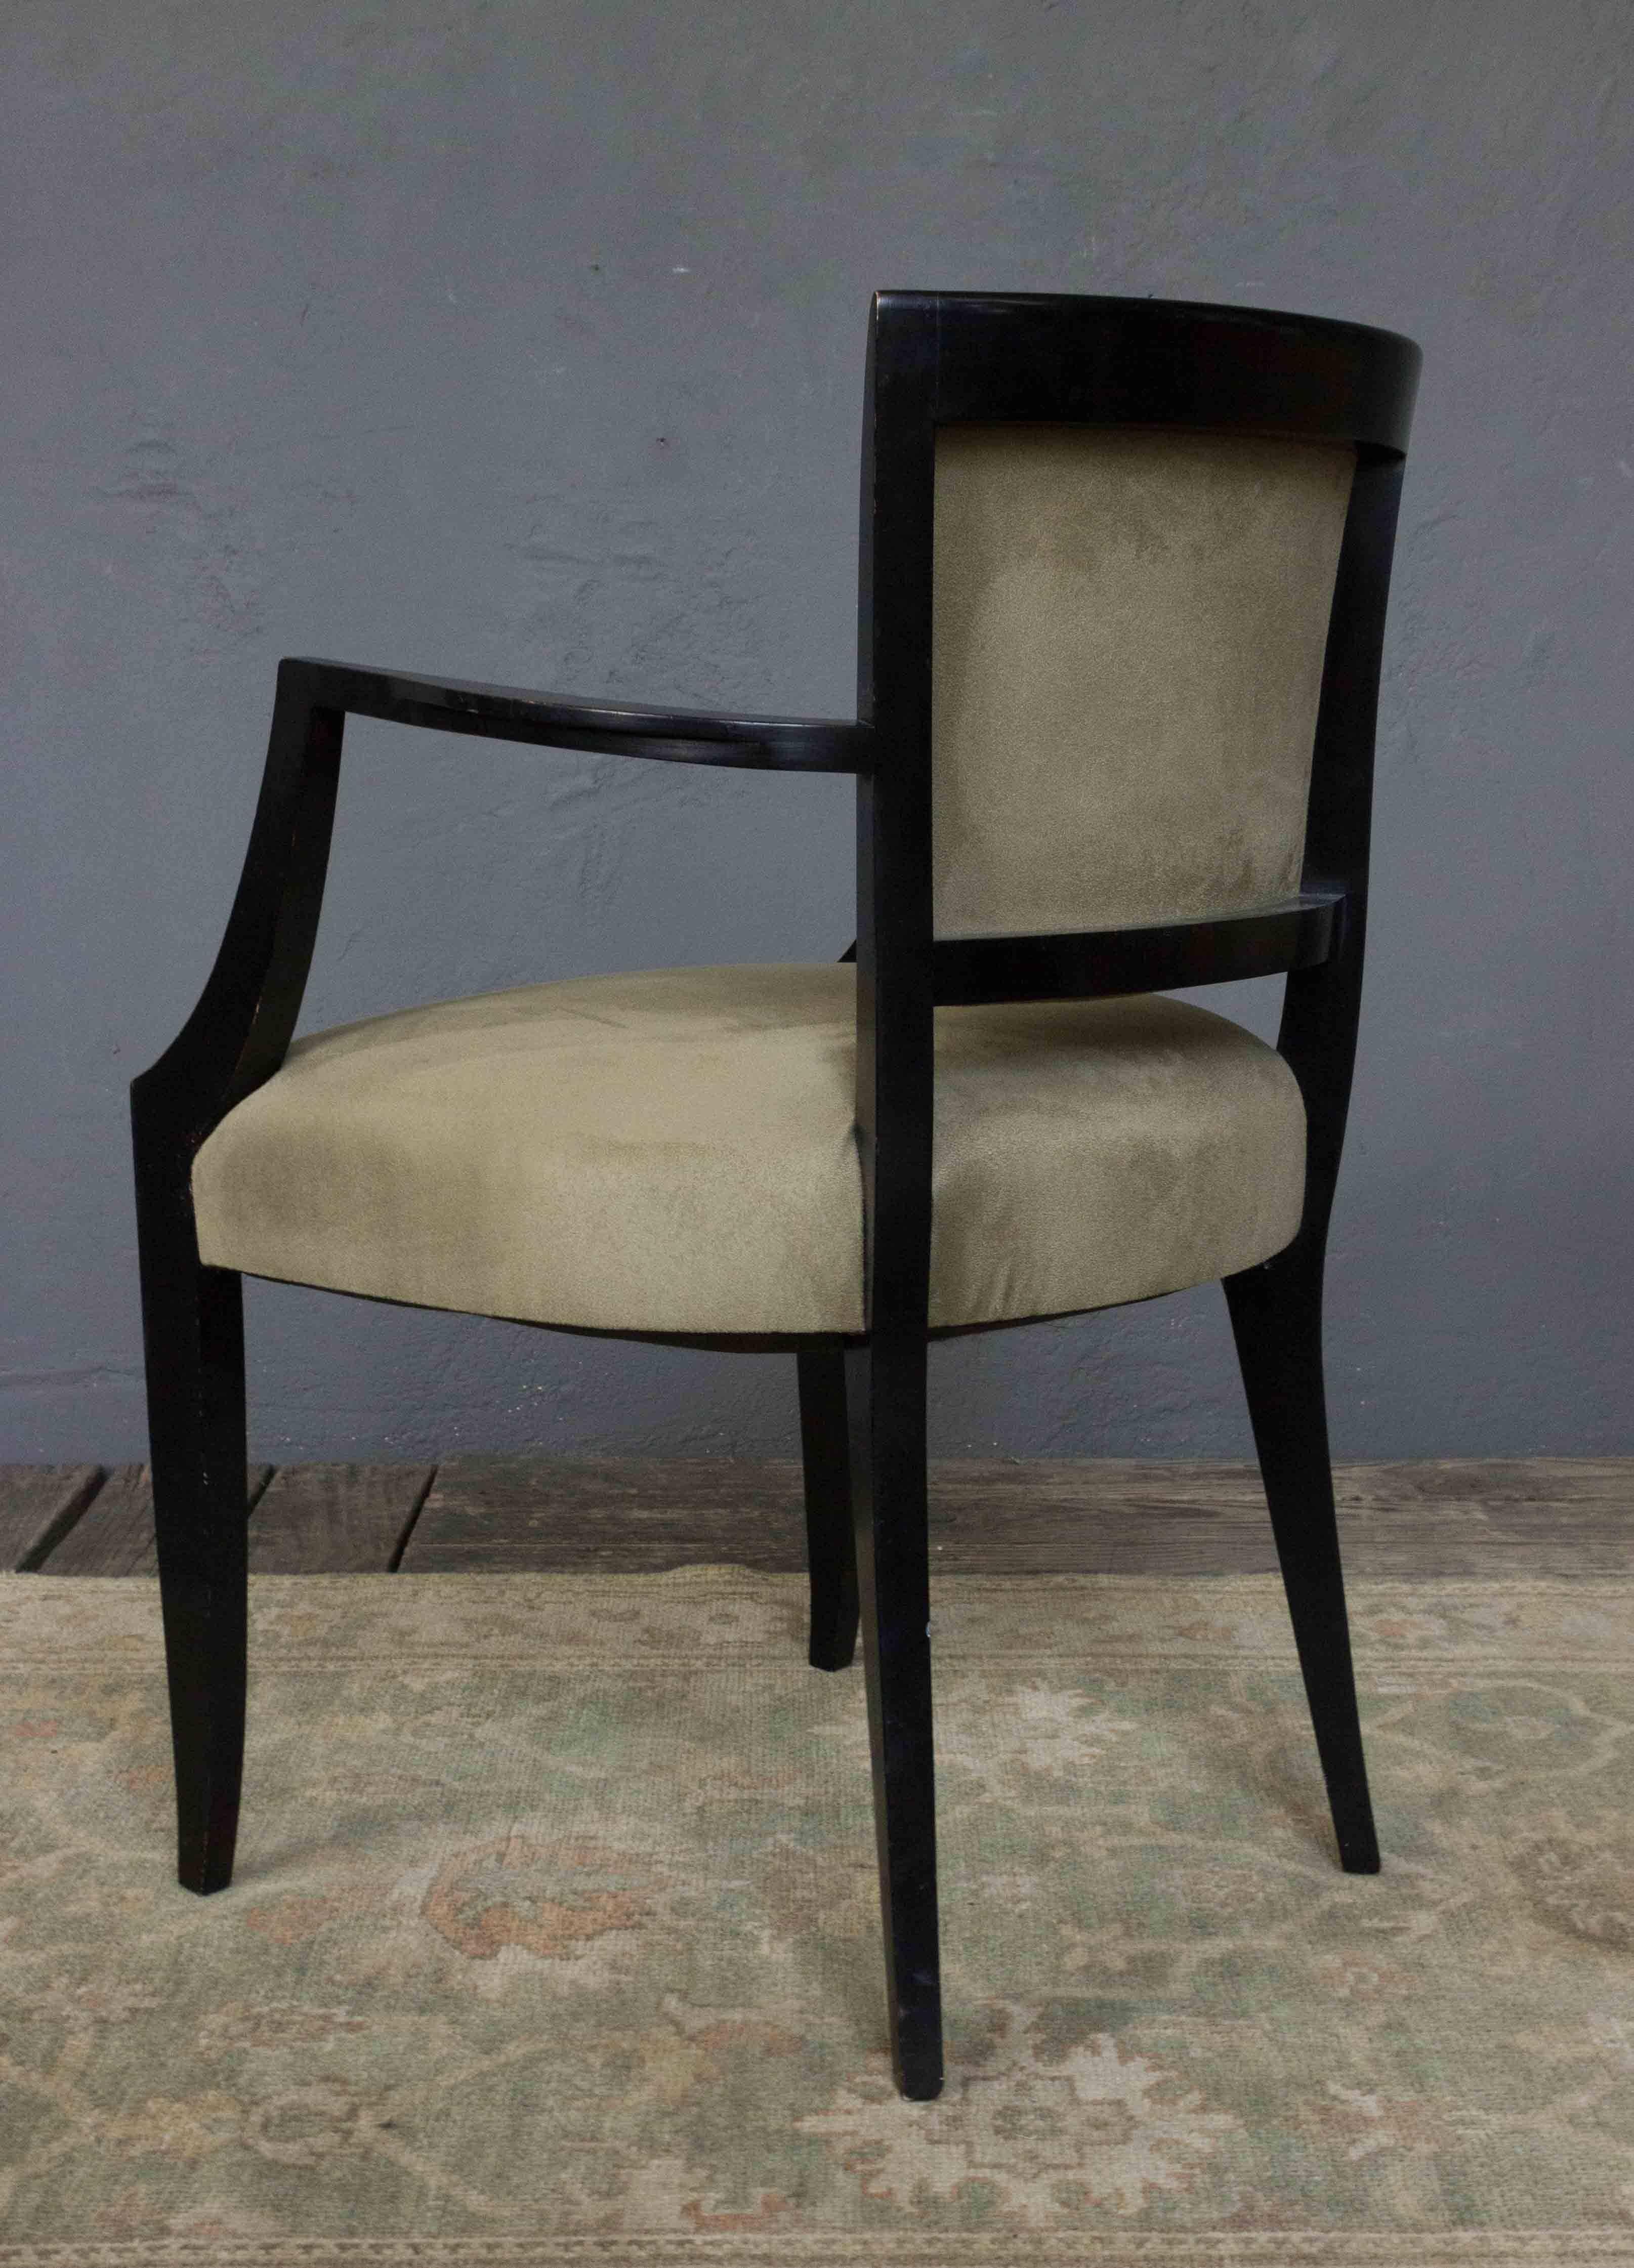 An exceptional reproduction of a 1940s Normandy style armchair. Bring an air of effortless grace and timeless sophistication to your home with this armchair. This piece is an exquisite reproduction of a classic French 1940s design, carefully crafted